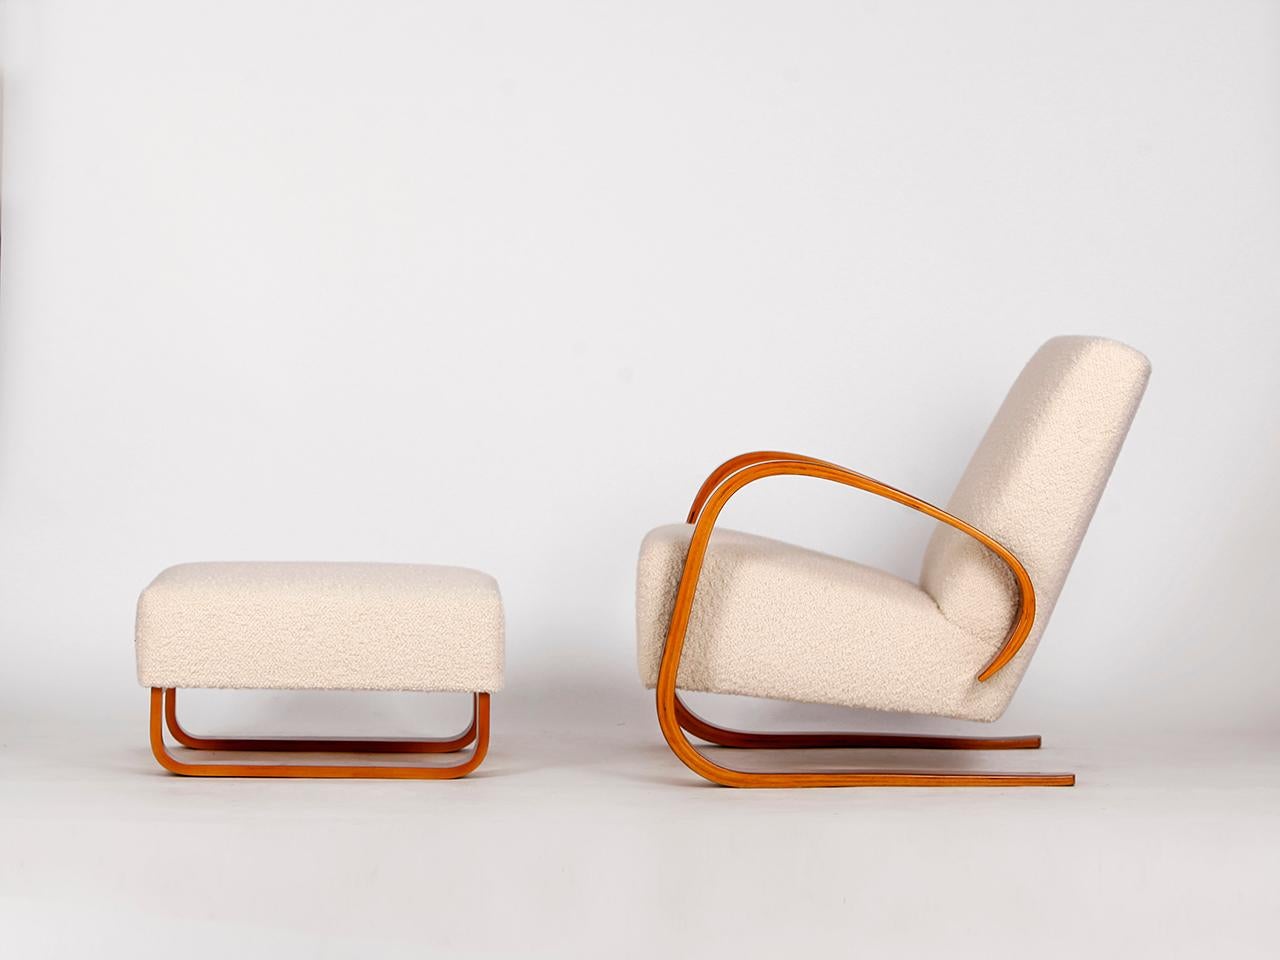 Designed by Miroslav Navratil for Spojene UP Zavody in the 1950s. Completely restored with lacquered walnut veneered armrests and a new spring core. With a wonderfully soft english cover boucle fabric made of wool. If desired, the matching stool can